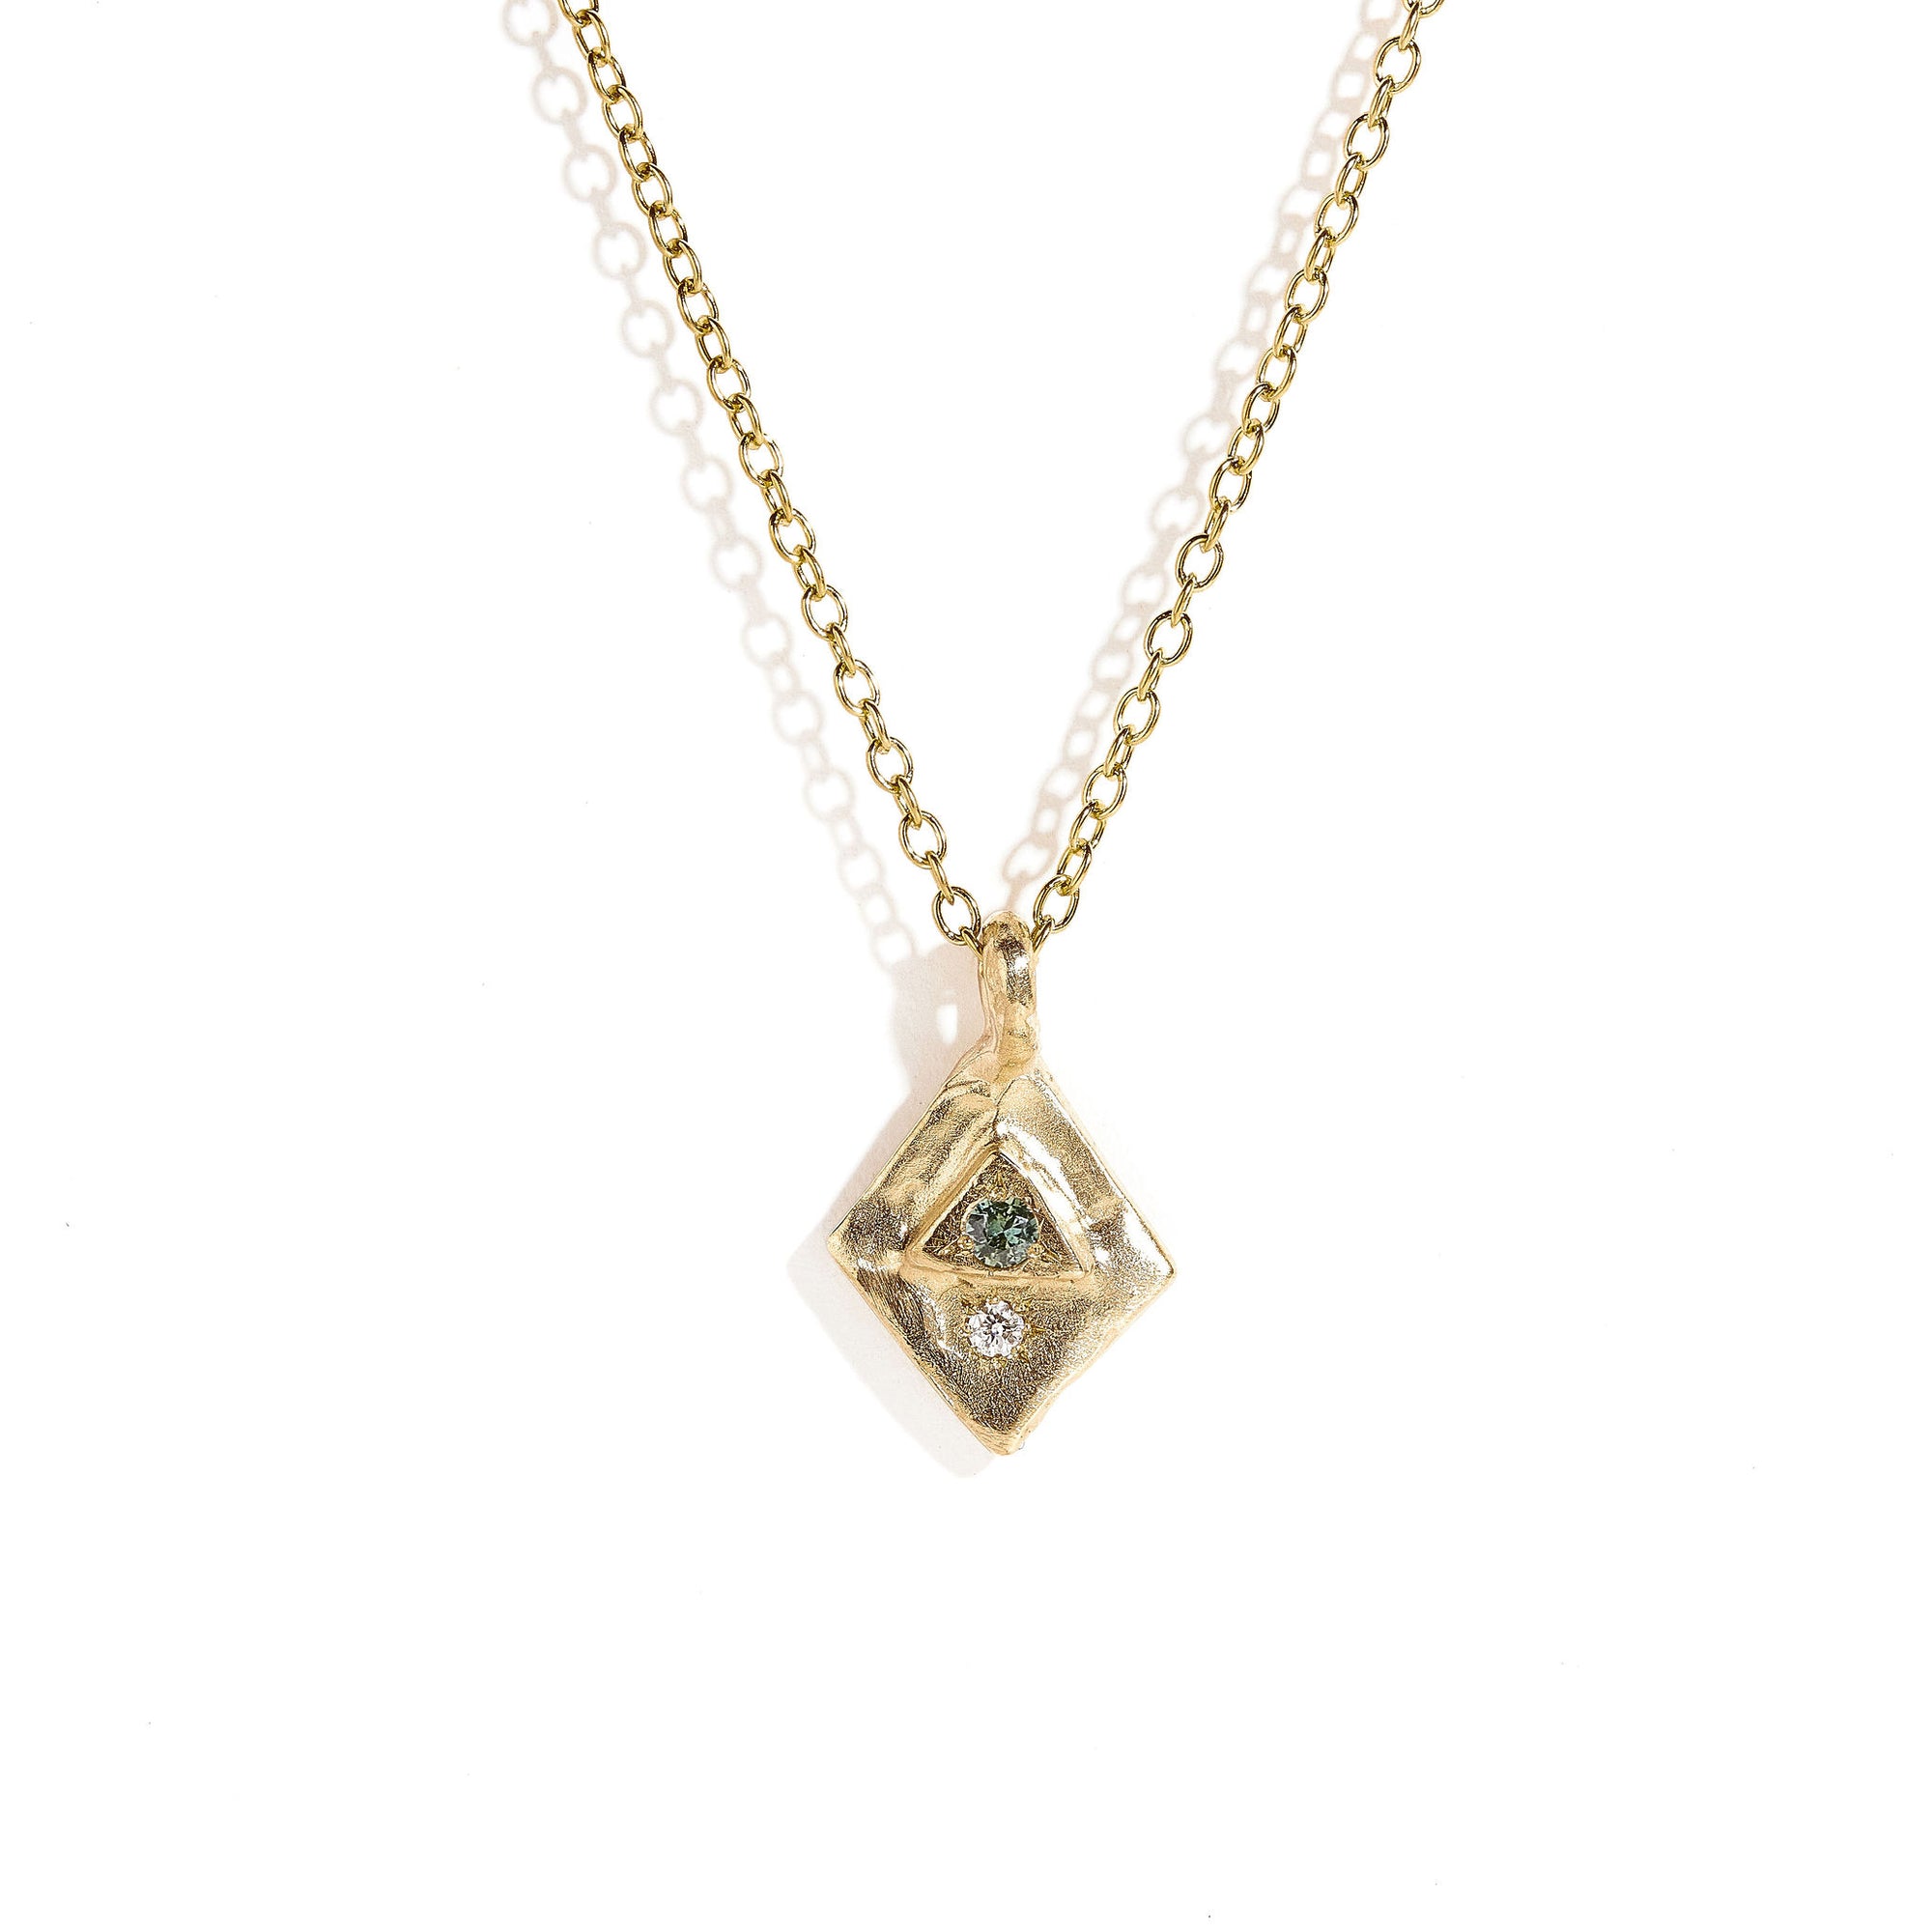 Teal Sapphire and White Diamond Pendant in 9ct Yellow Gold 